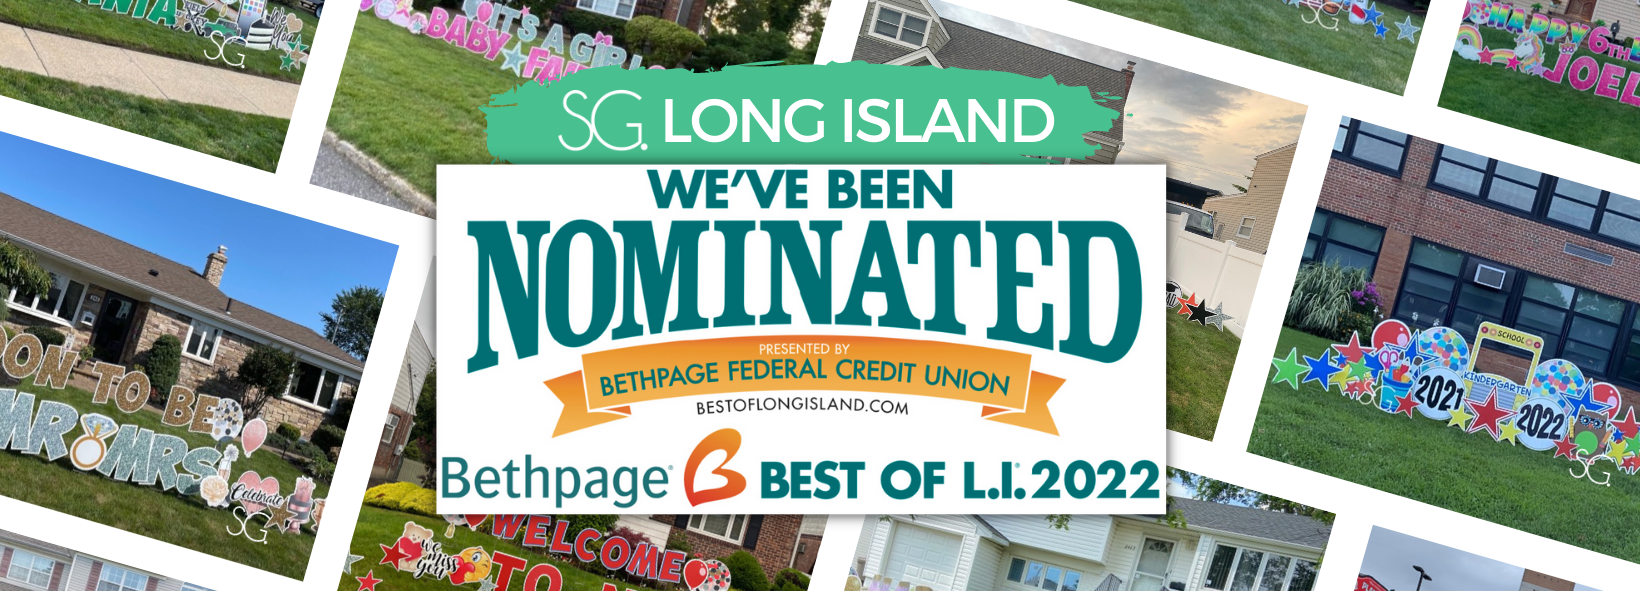 Nominated Long Island's Best Yard Greeting Company